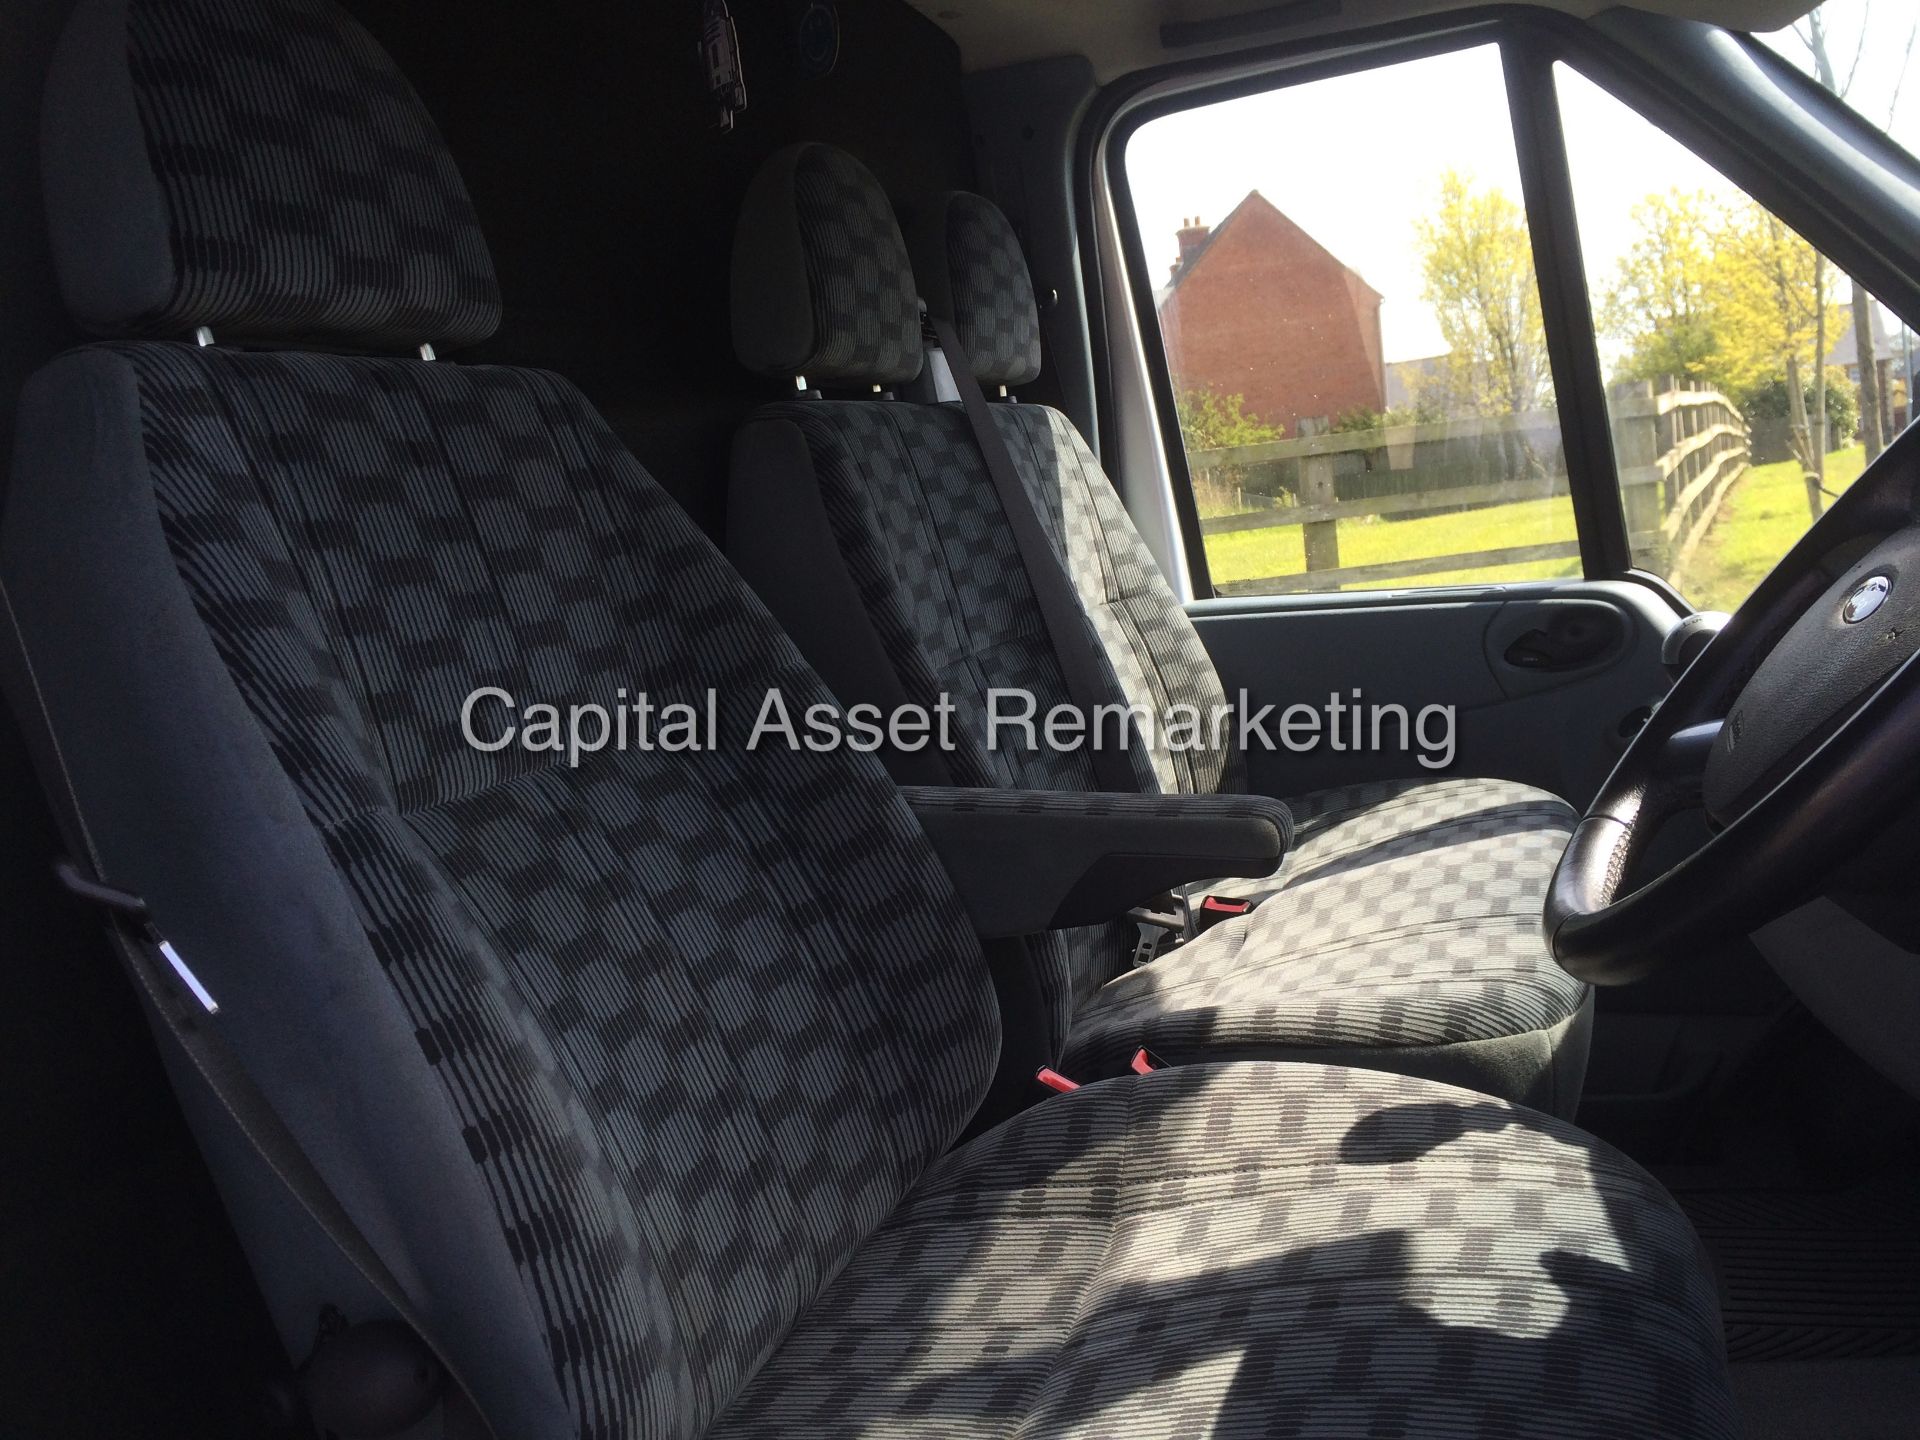 FORD TRANSIT 2.2TDCI "LIMITED" 125PSI / 6 SPEED (2013 MODEL) FULLY LOADED - AIR CON - ELEC PACK - Image 12 of 21